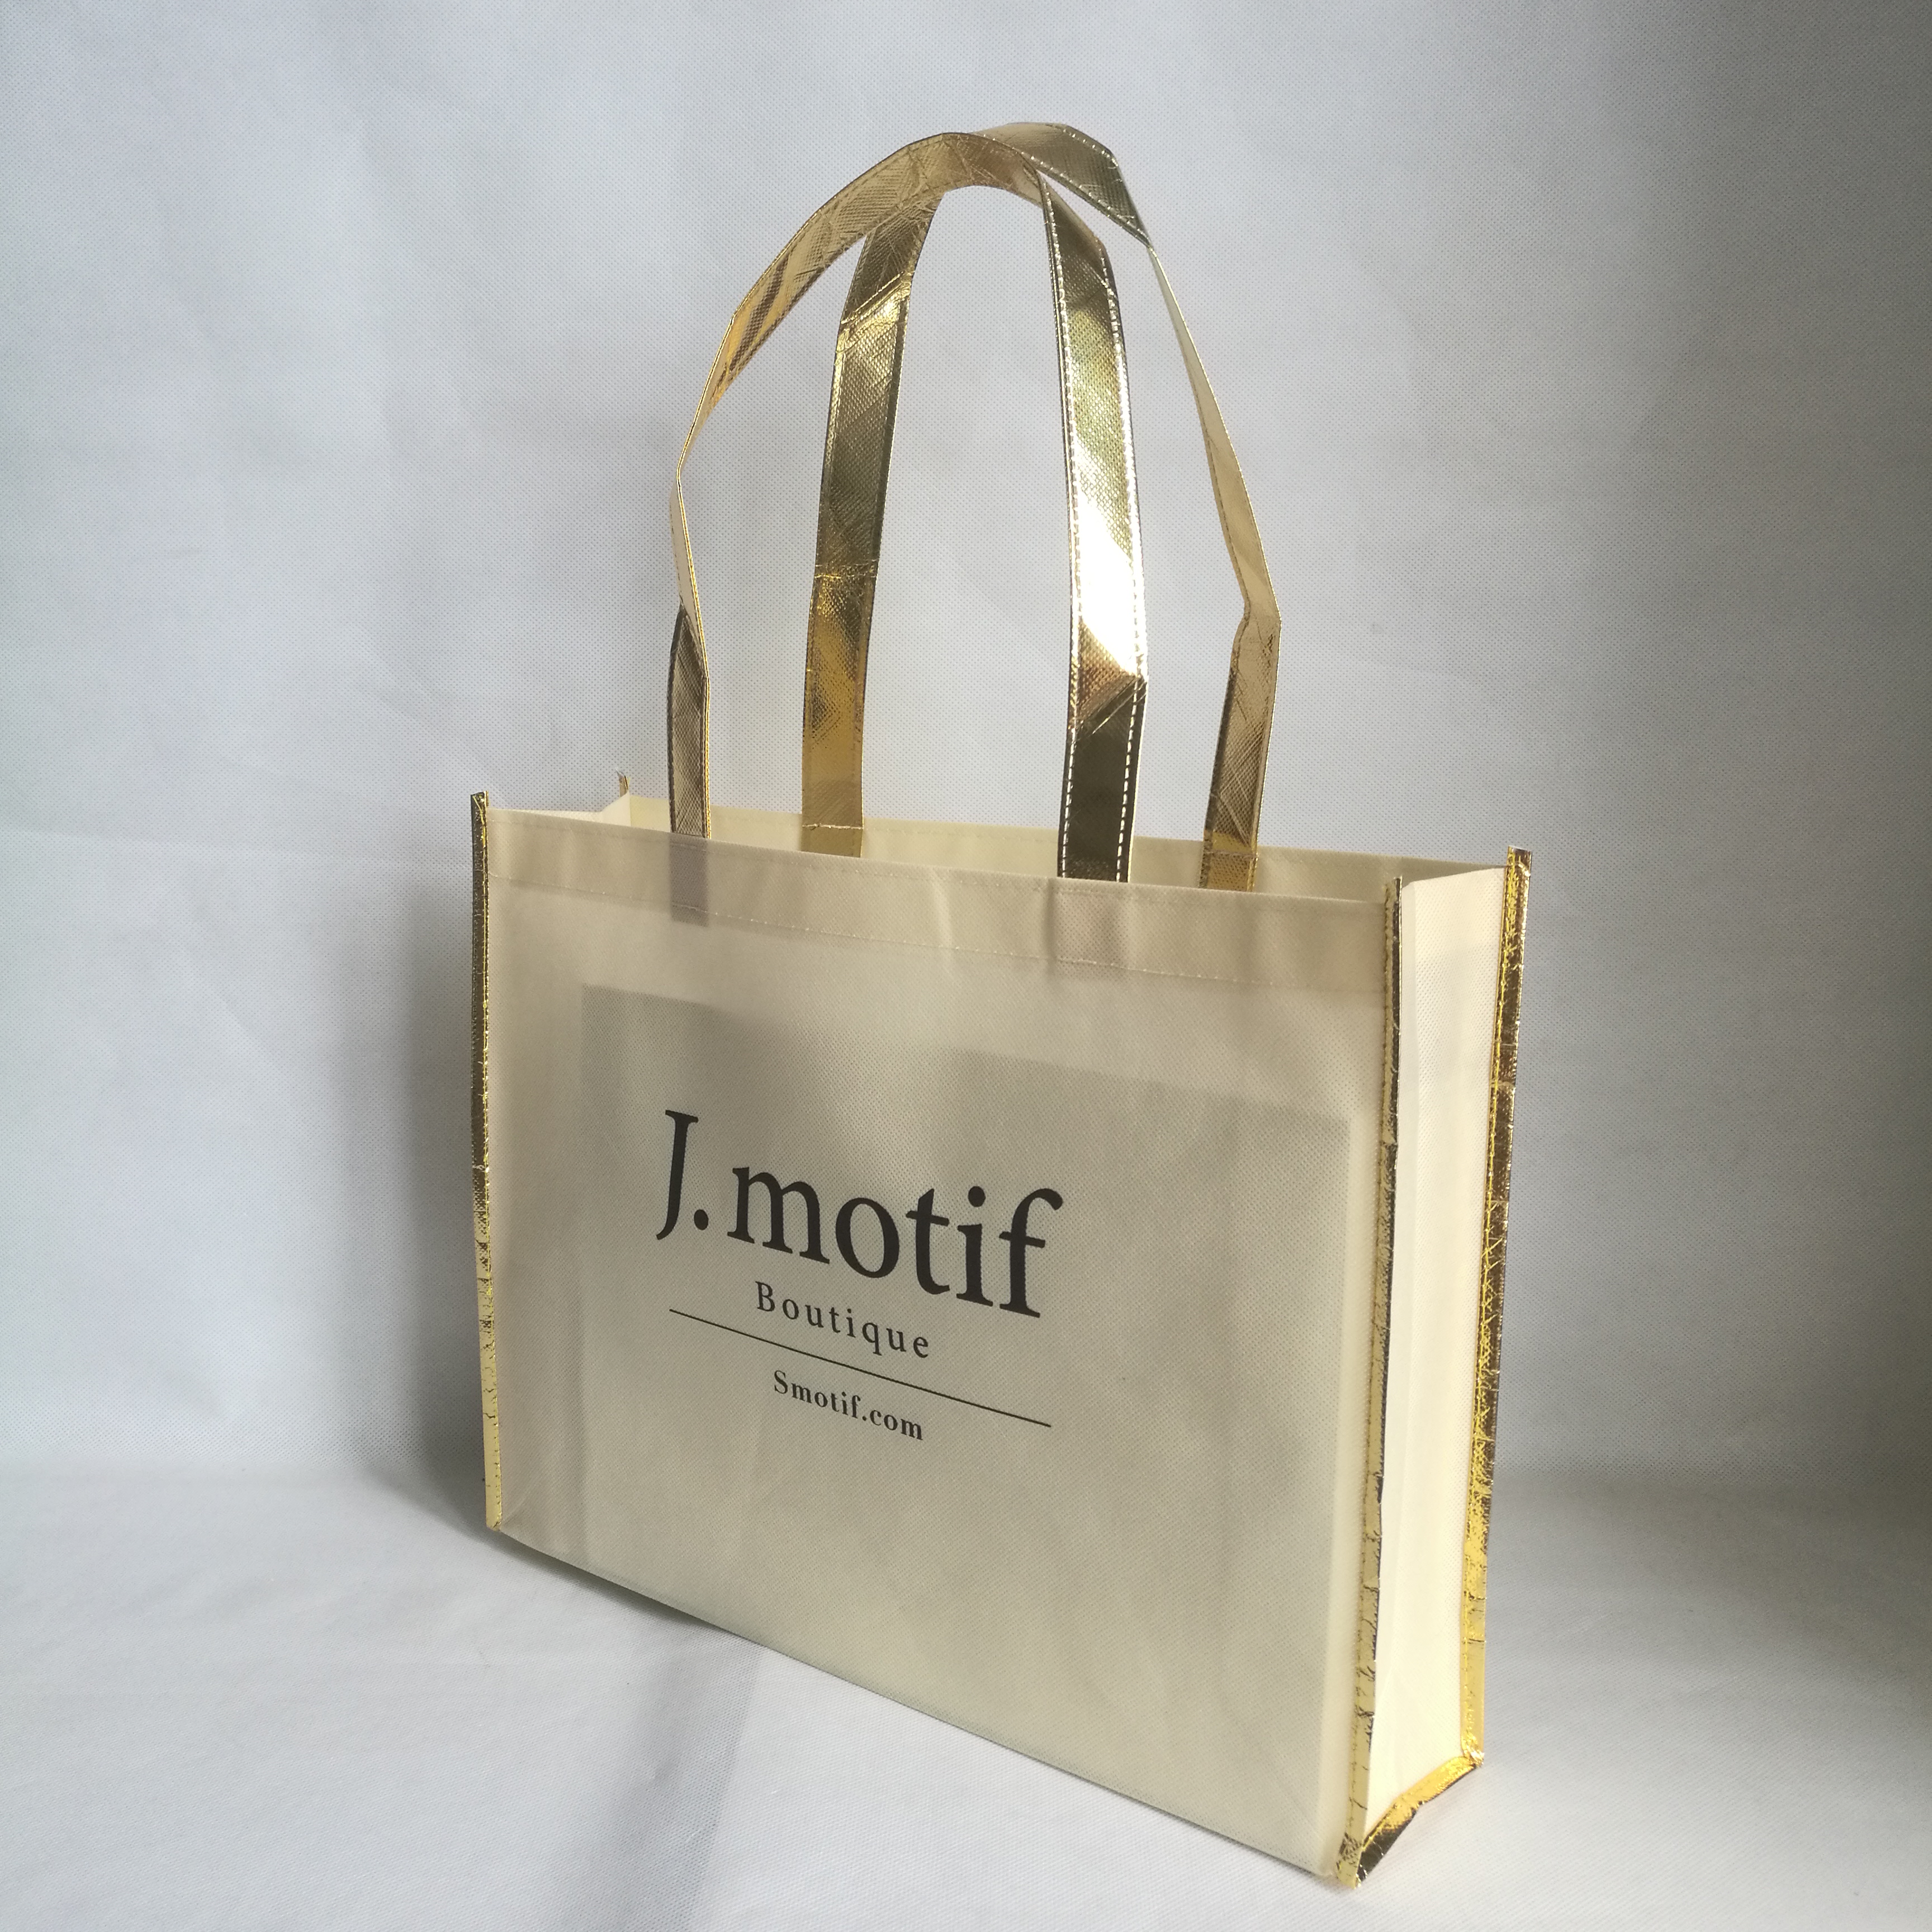 1000pcs/lot Beige Non Woven Fabric Shopping Bags with Gold Trim Folding Reusable Non Woven Promotional Bags for Trade Show/Gifts